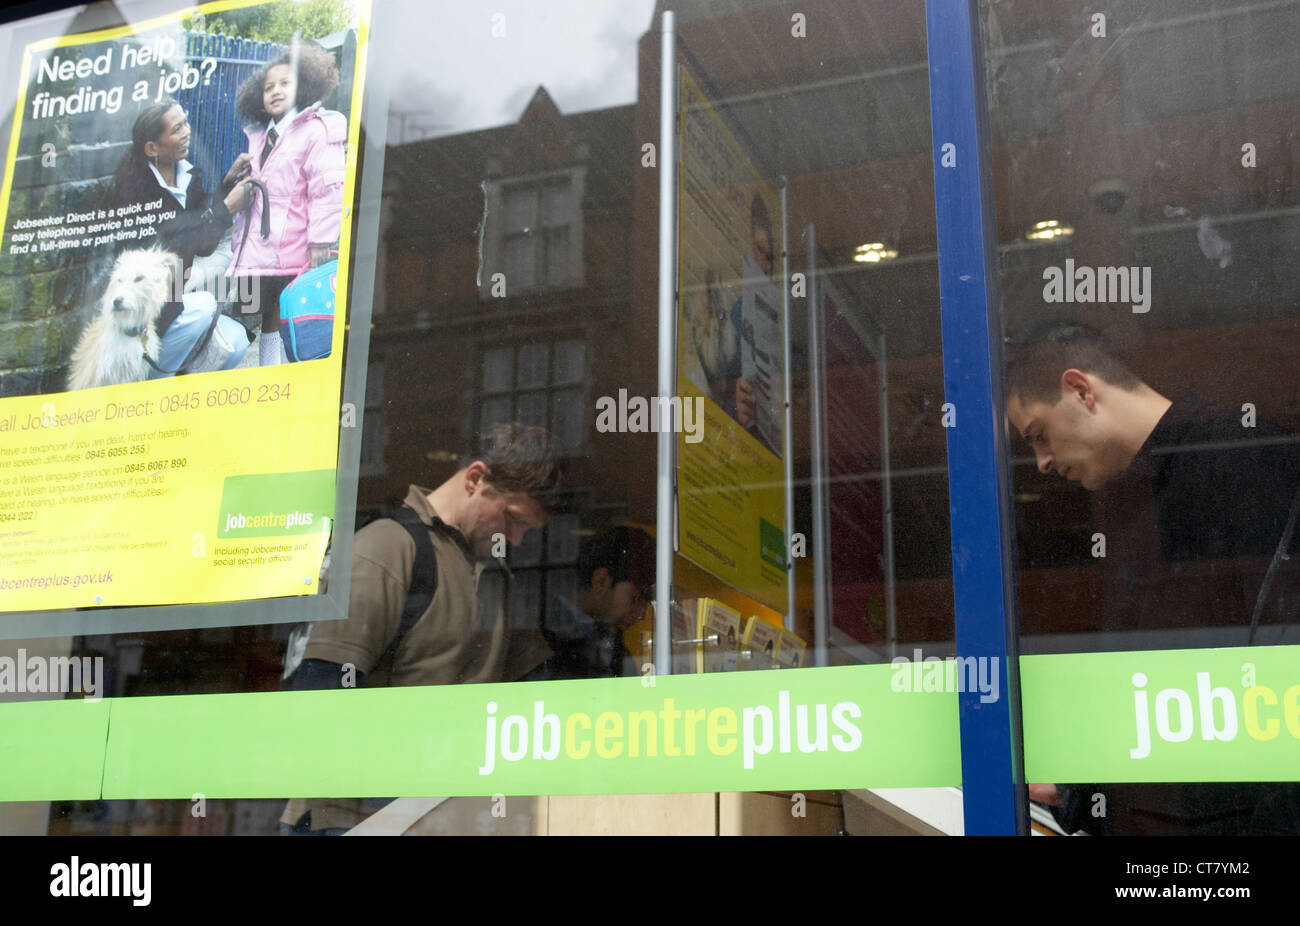 London - Job Seekers people in a Jobcentre Plus Stock Photo